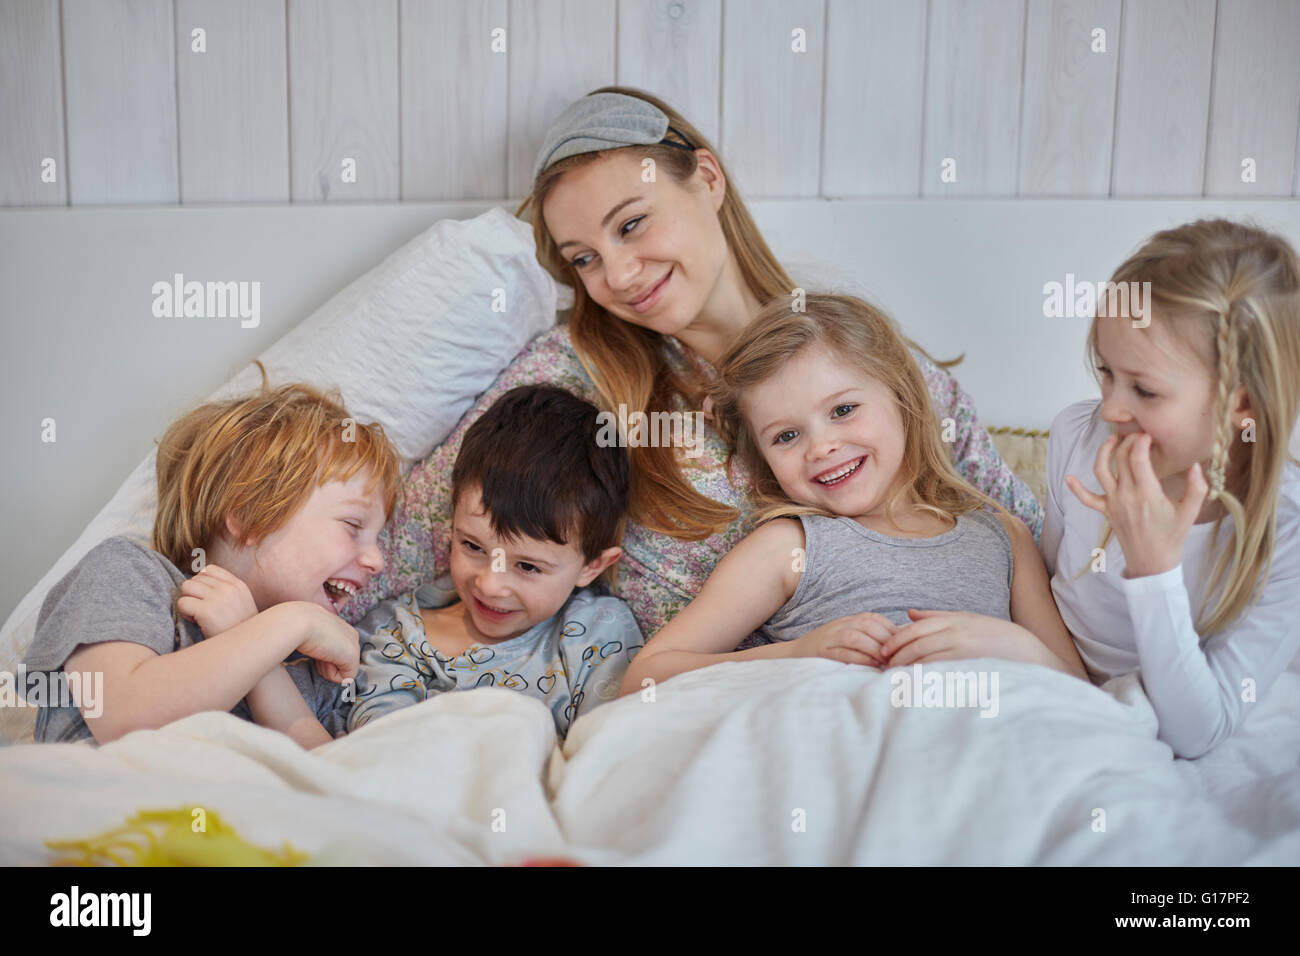 Mother and children together in bed Stock Photo